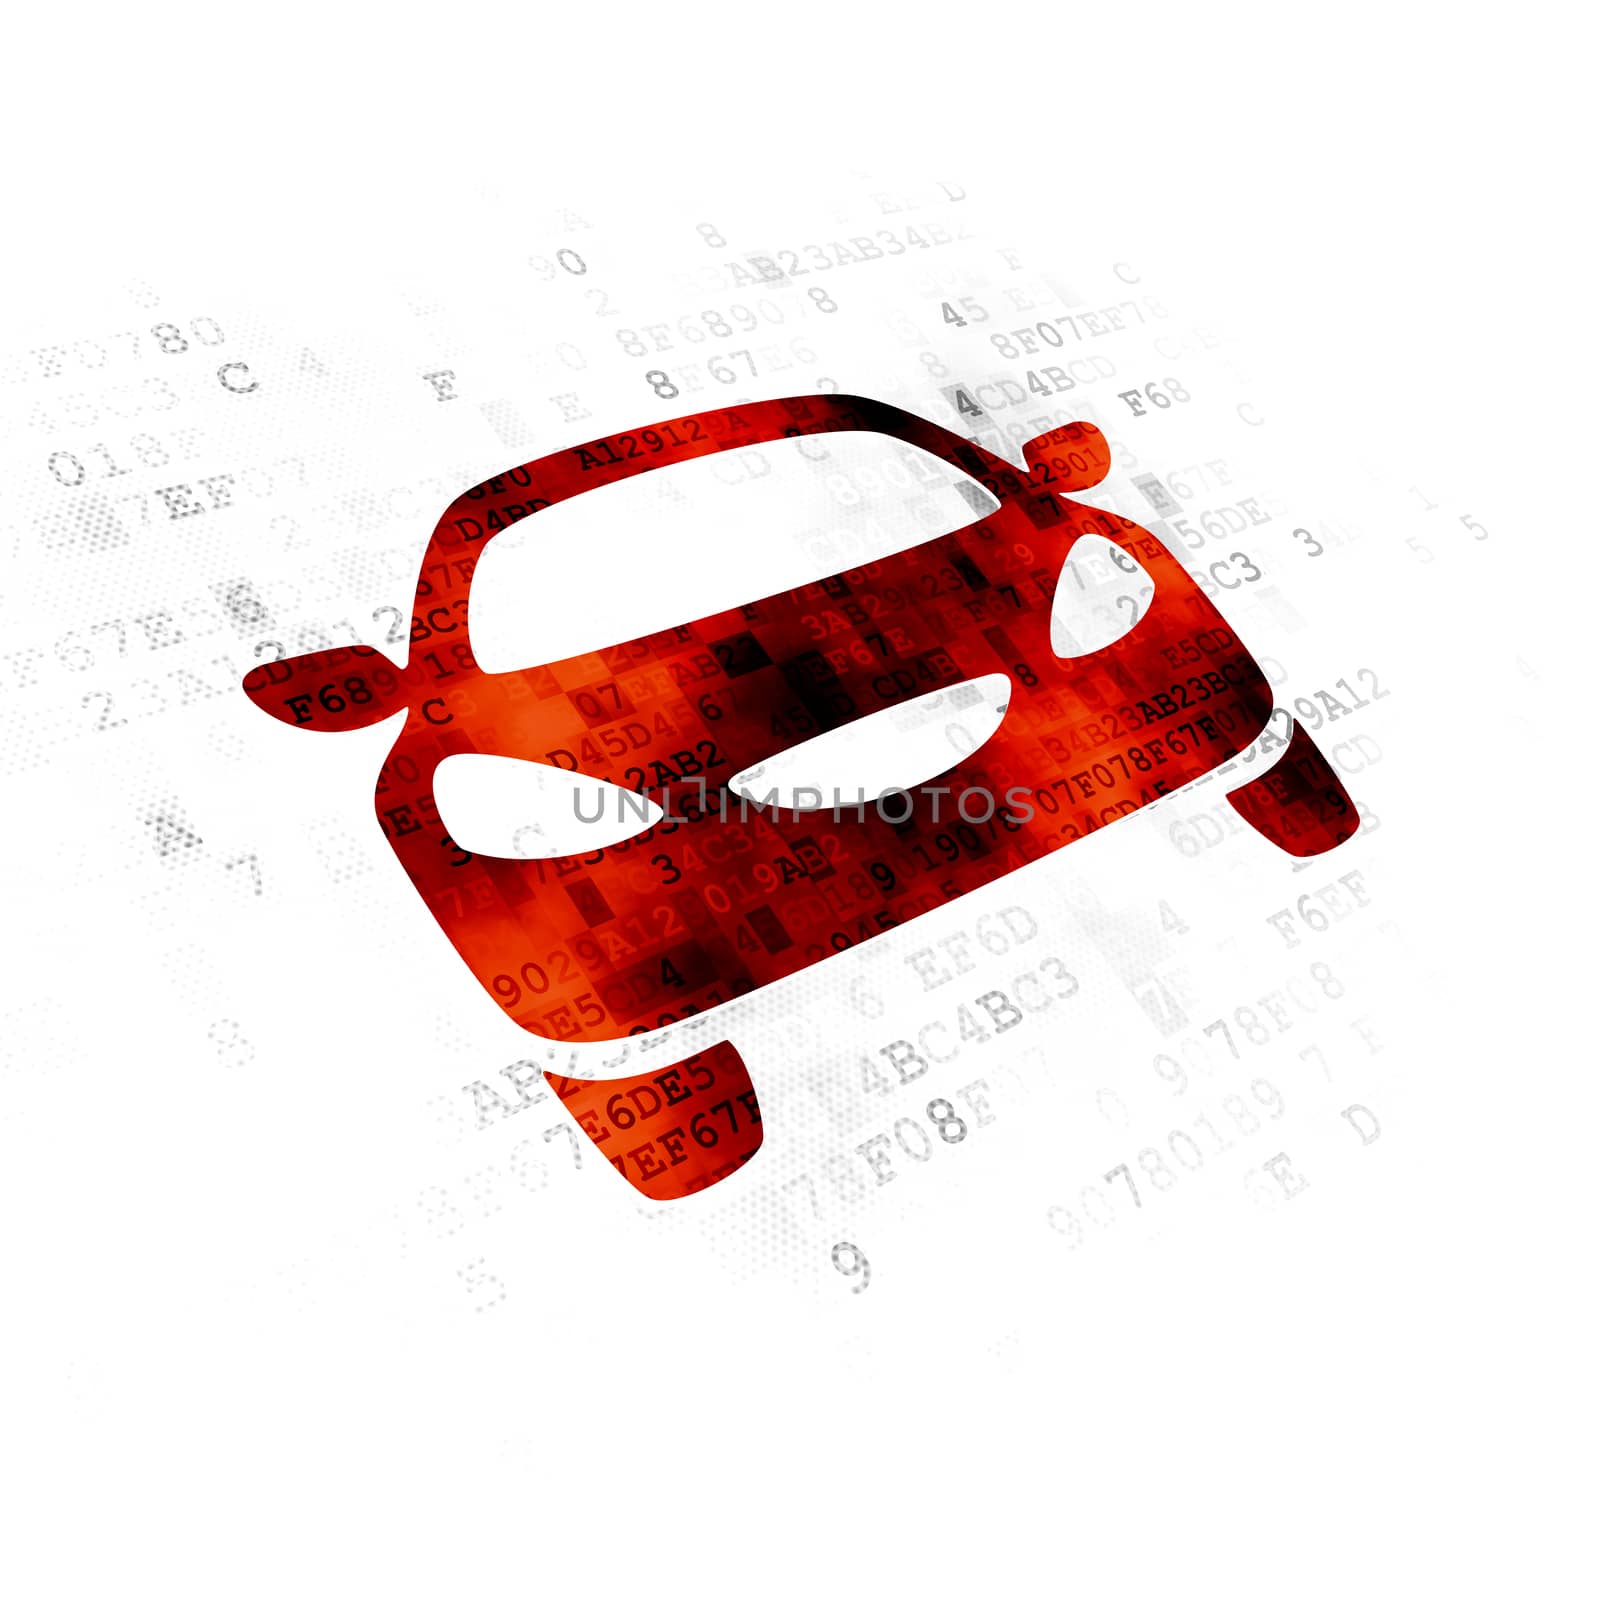 Vacation concept: Pixelated red Car icon on Digital background